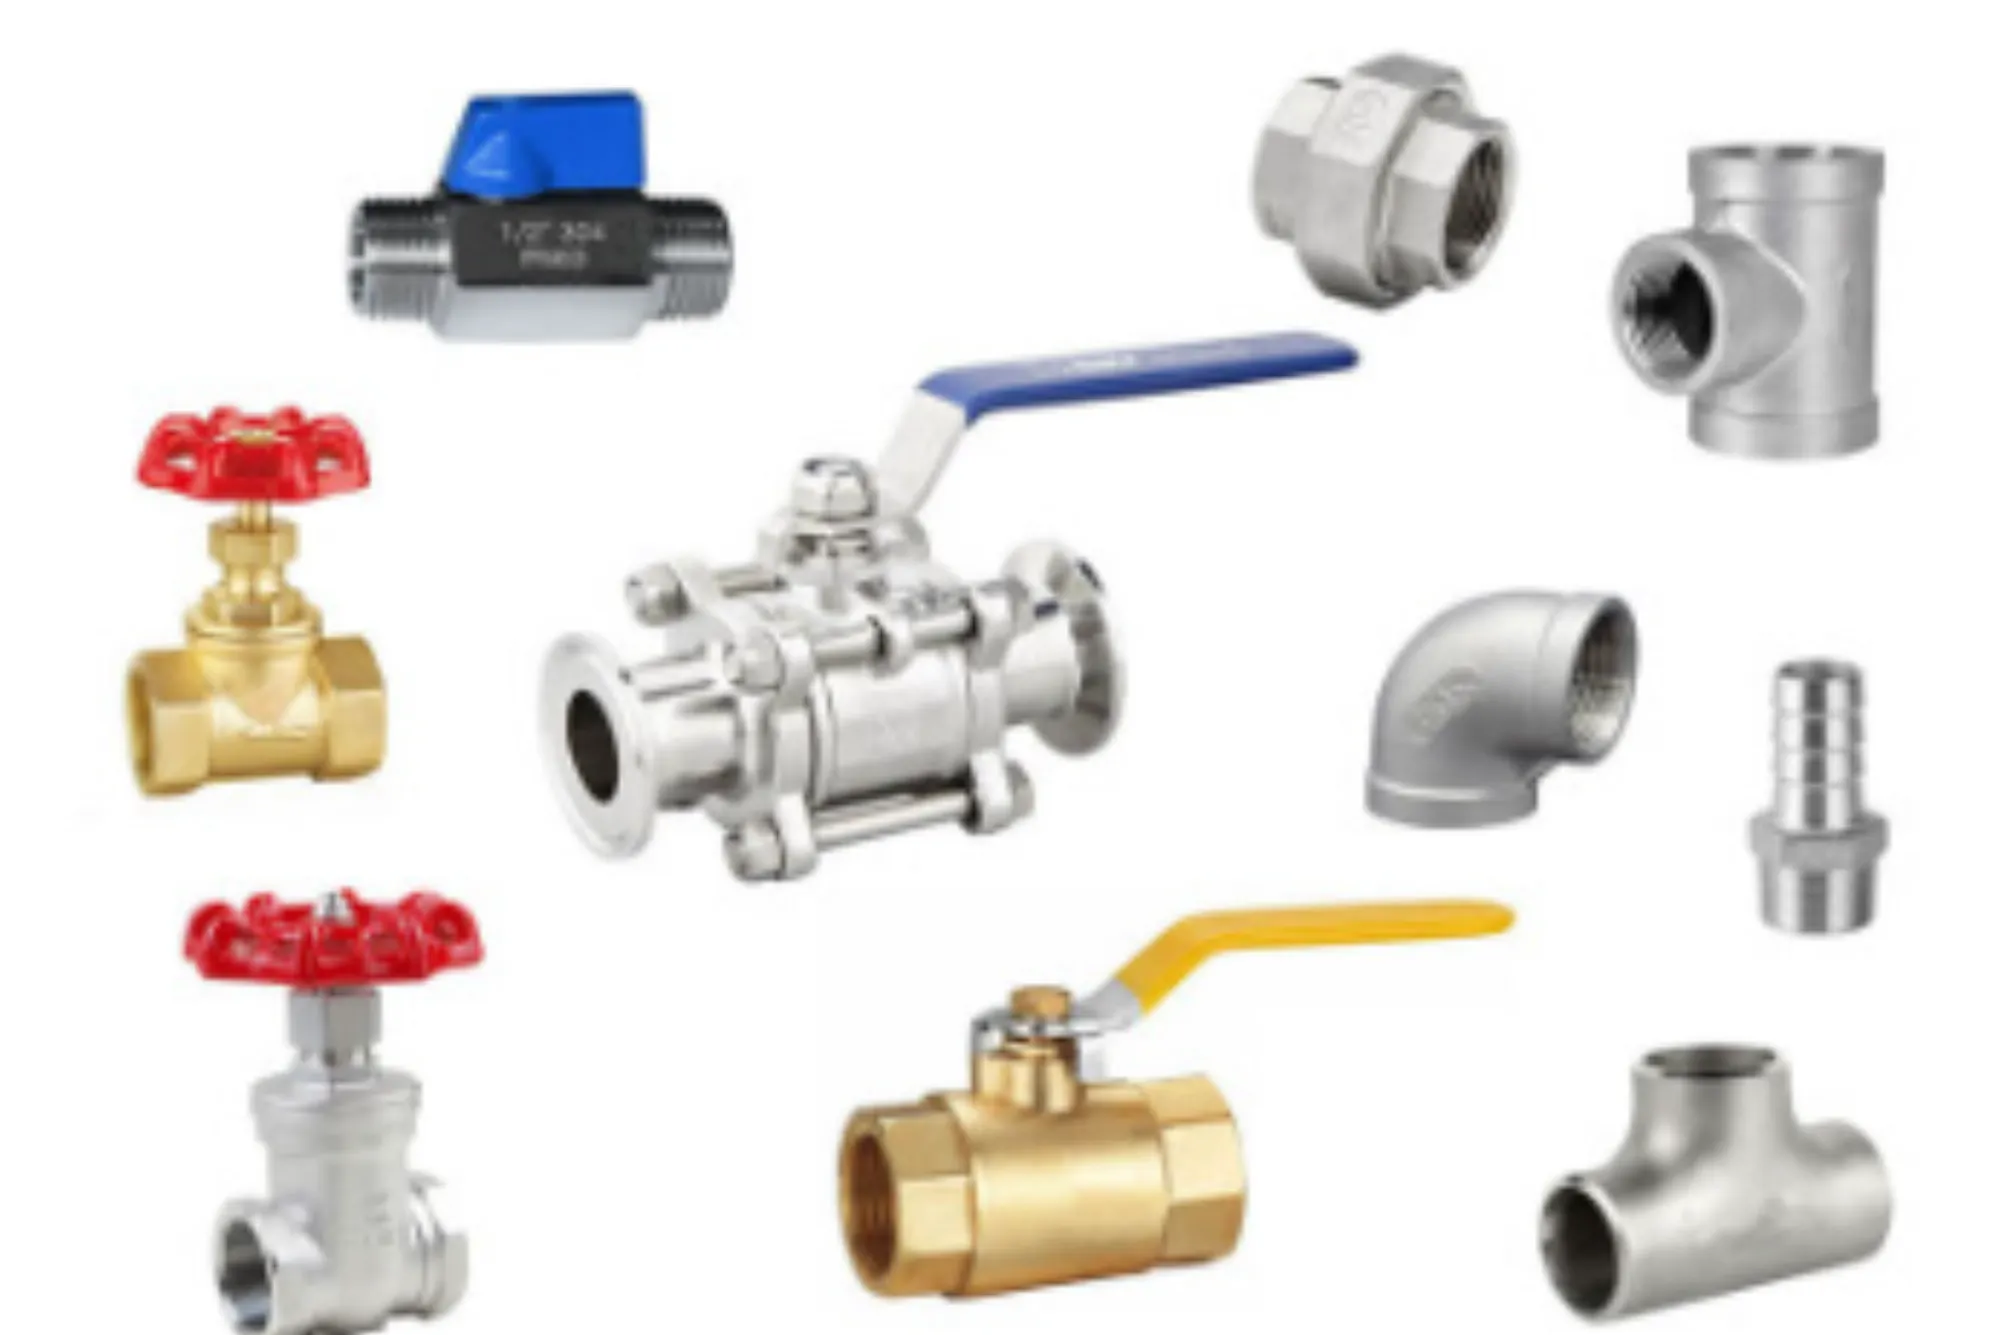 Reliable and Compact Union Metal's Stainless Steel Mini Ball Valves (M-F) for Versatile Applications